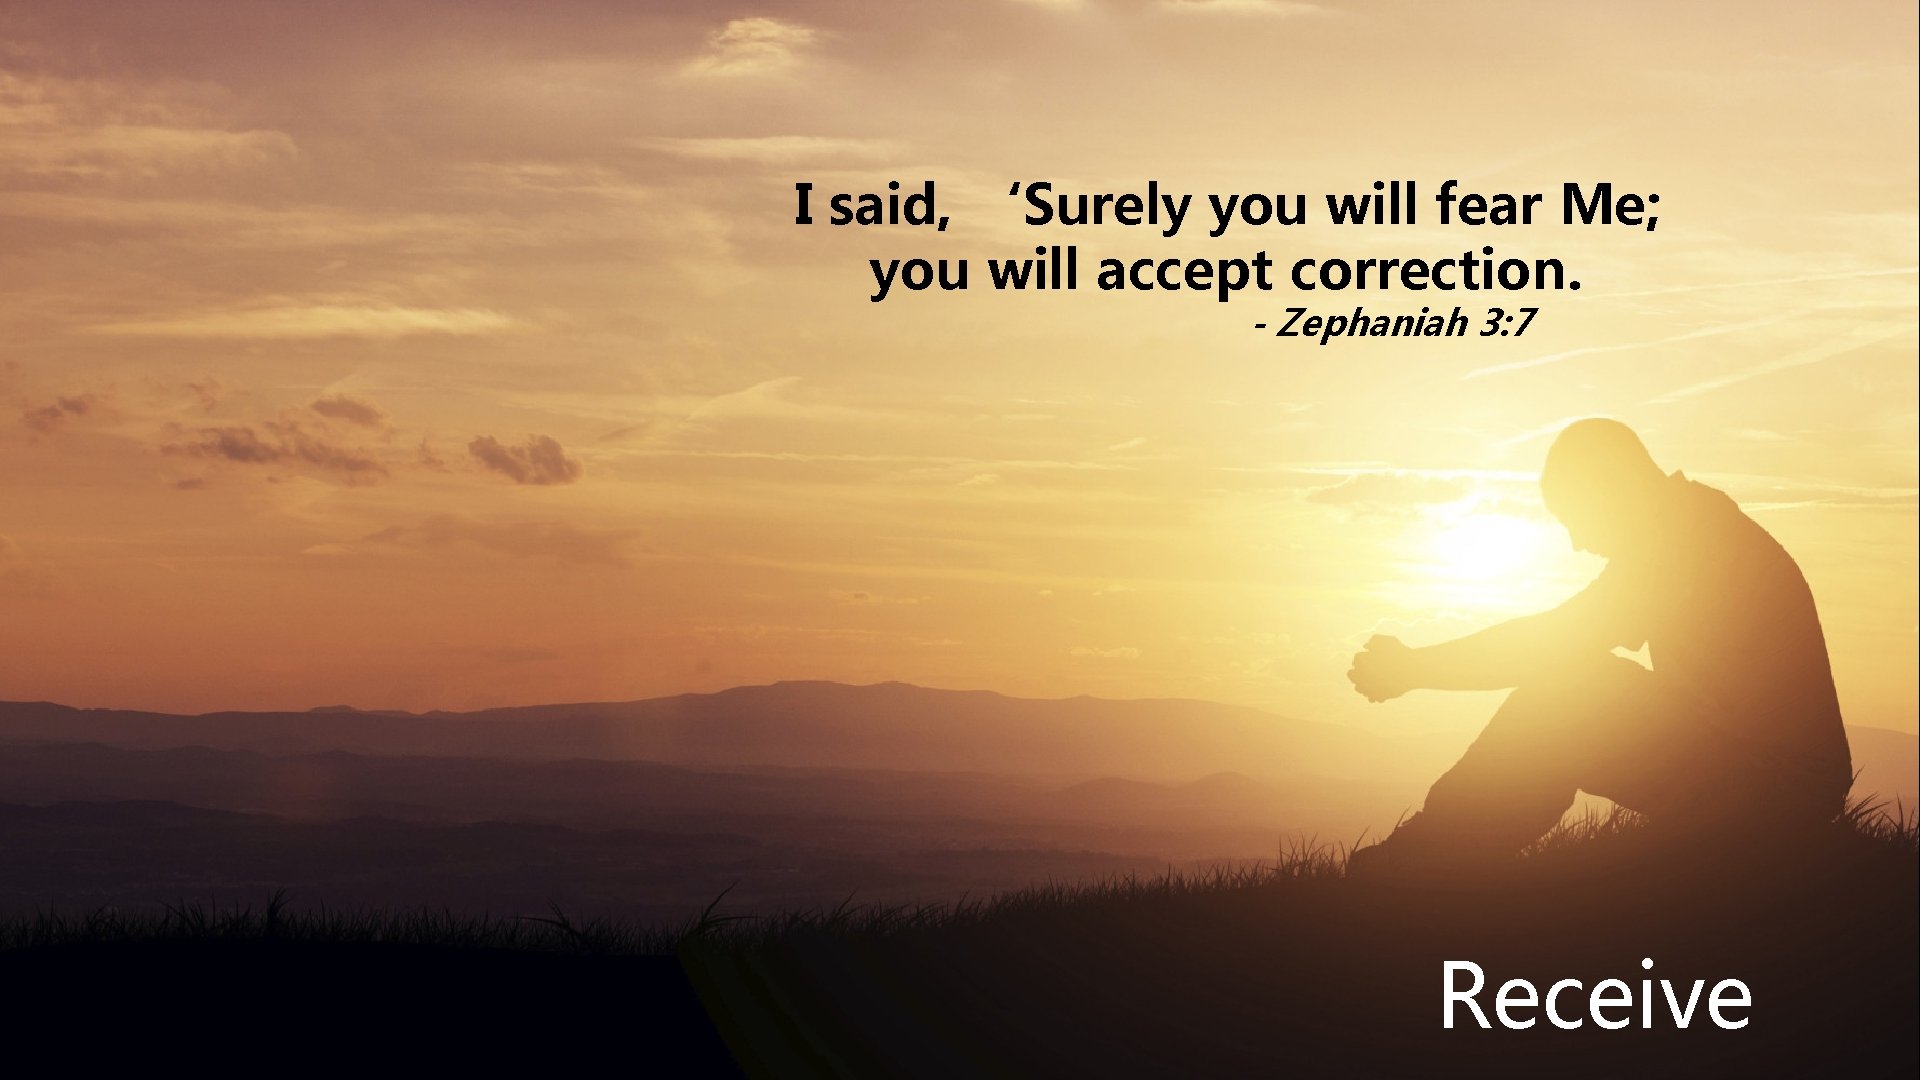 I said, ‘Surely you will fear Me; you will accept correction. - Zephaniah 3: